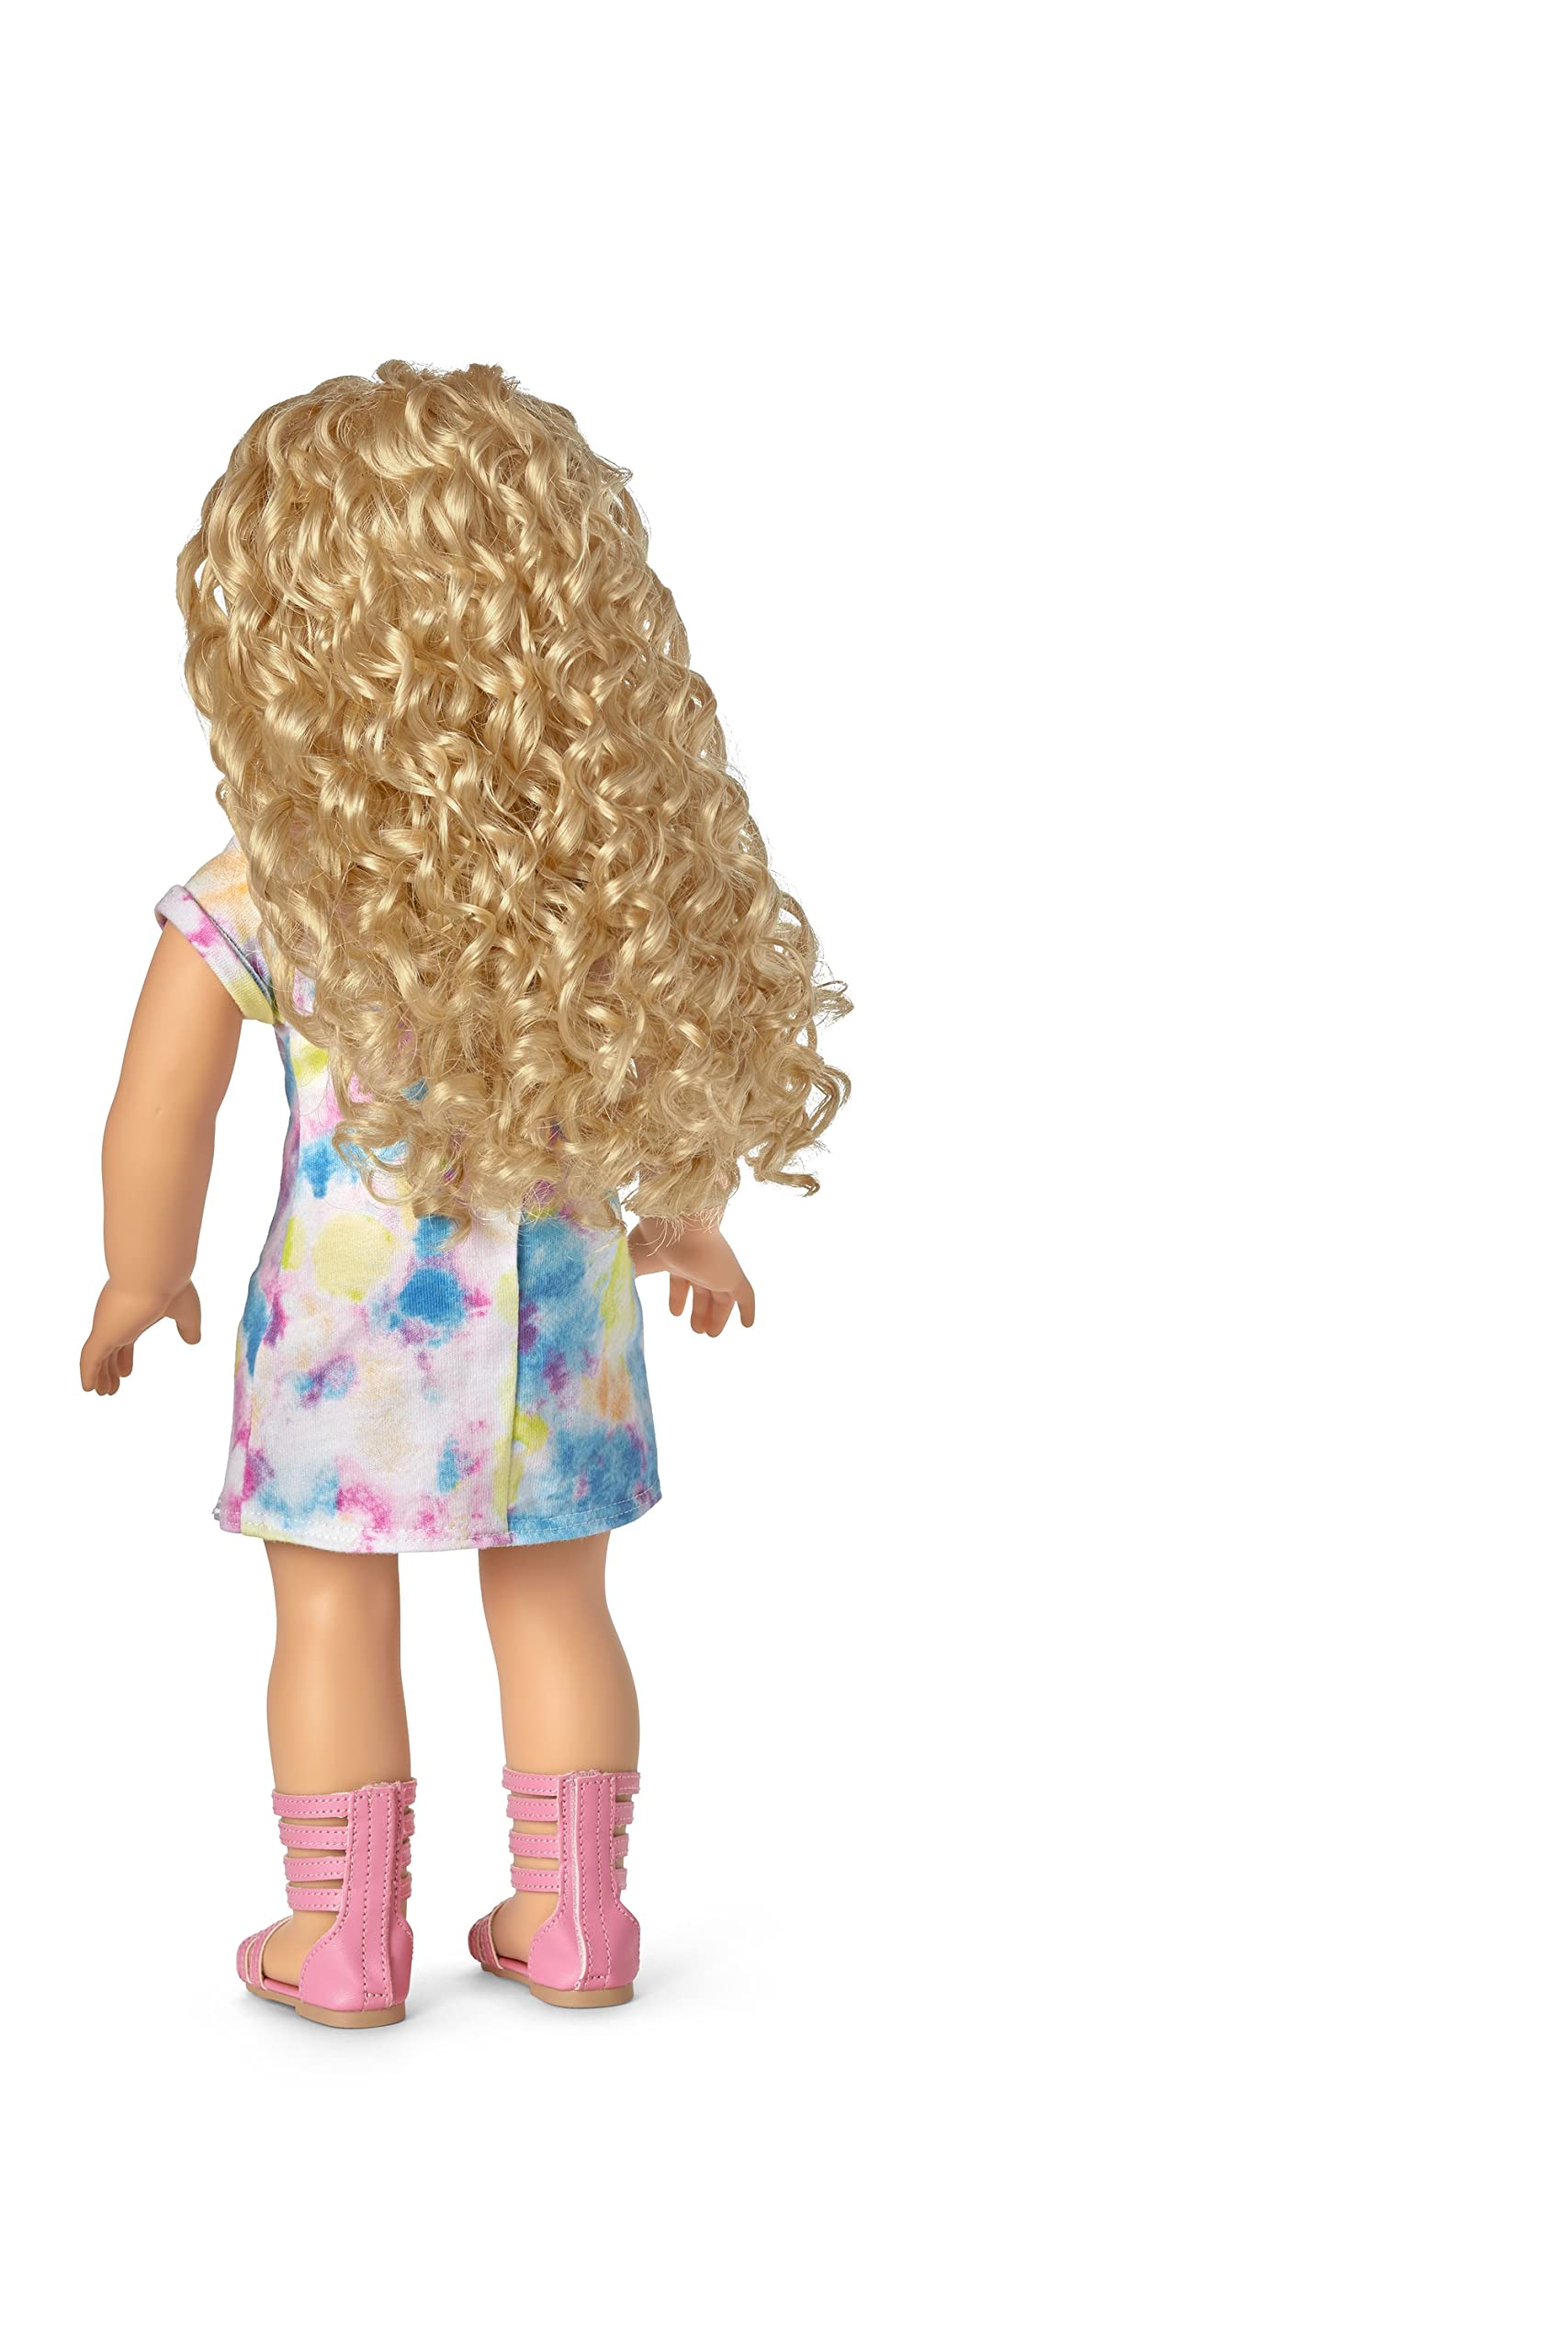 American Girl Truly Me 18-inch Doll #115 with Gray Eyes, Curly Blonde Hair, Light Skin, Tie Dye T-shirt Dress, For Ages 6+